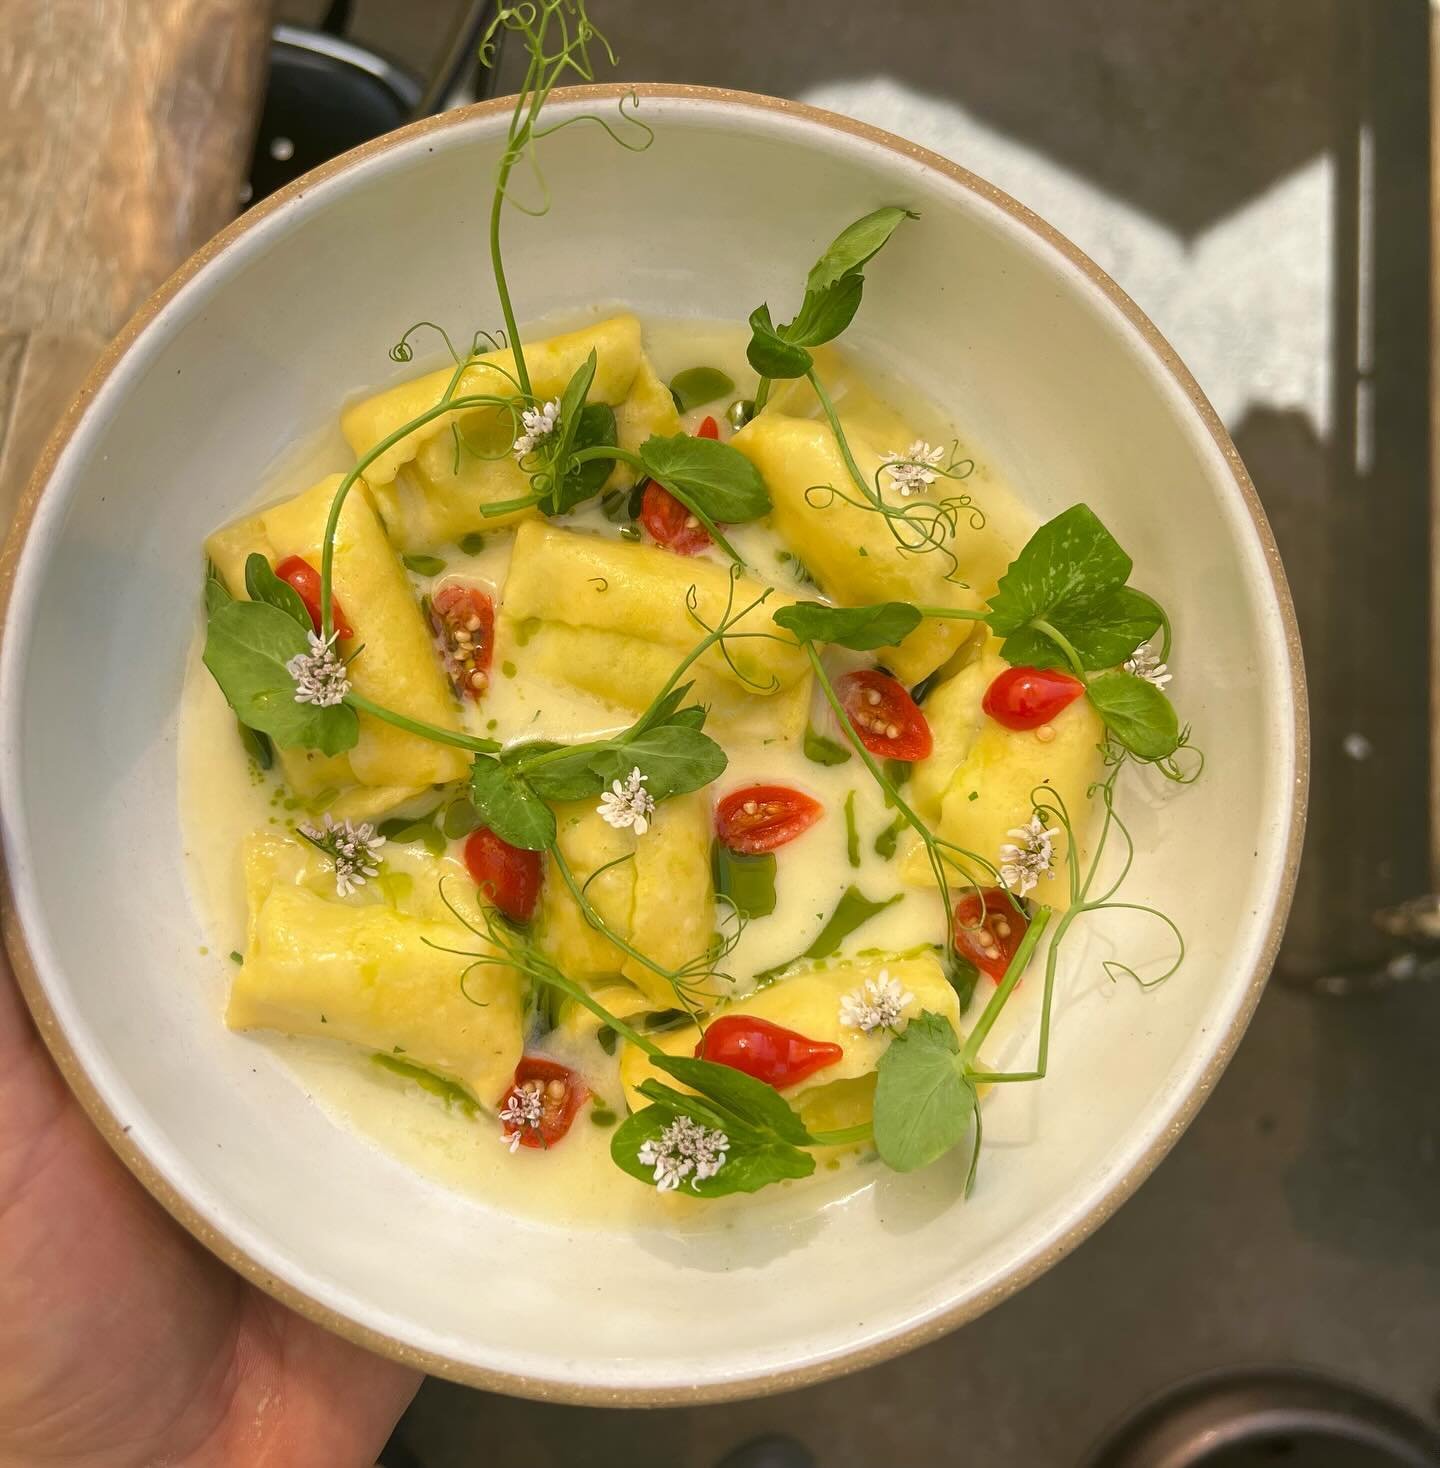 Pasta Wednesday Special! 🍝 

Agnolotti Pasta filled with Mascarpone, Fresh Mozzarella, Corn, Poblano, Garlic, Parsley and Coriander. In a Butter Parmesan Sauce with Sweety Tear Drop Peppers and Herb Oil. 🧀 🌽 🧈🌶️ 🌱 

Tonight only! 

Our Hours: 
